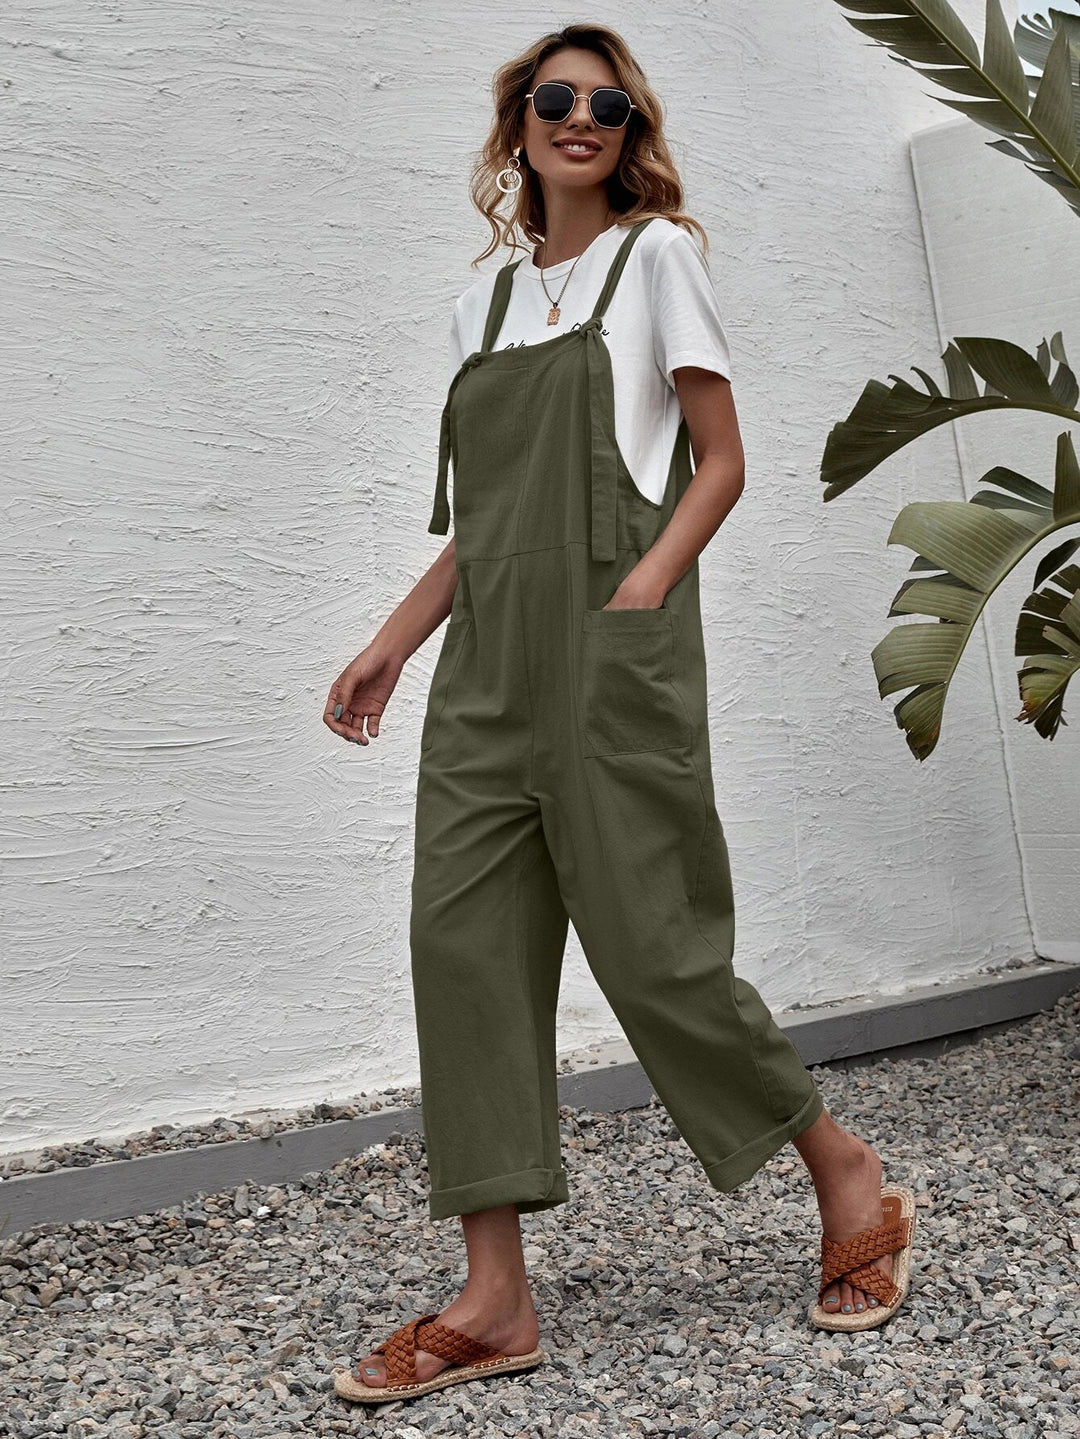 All Products – Comfy Jumpsuits